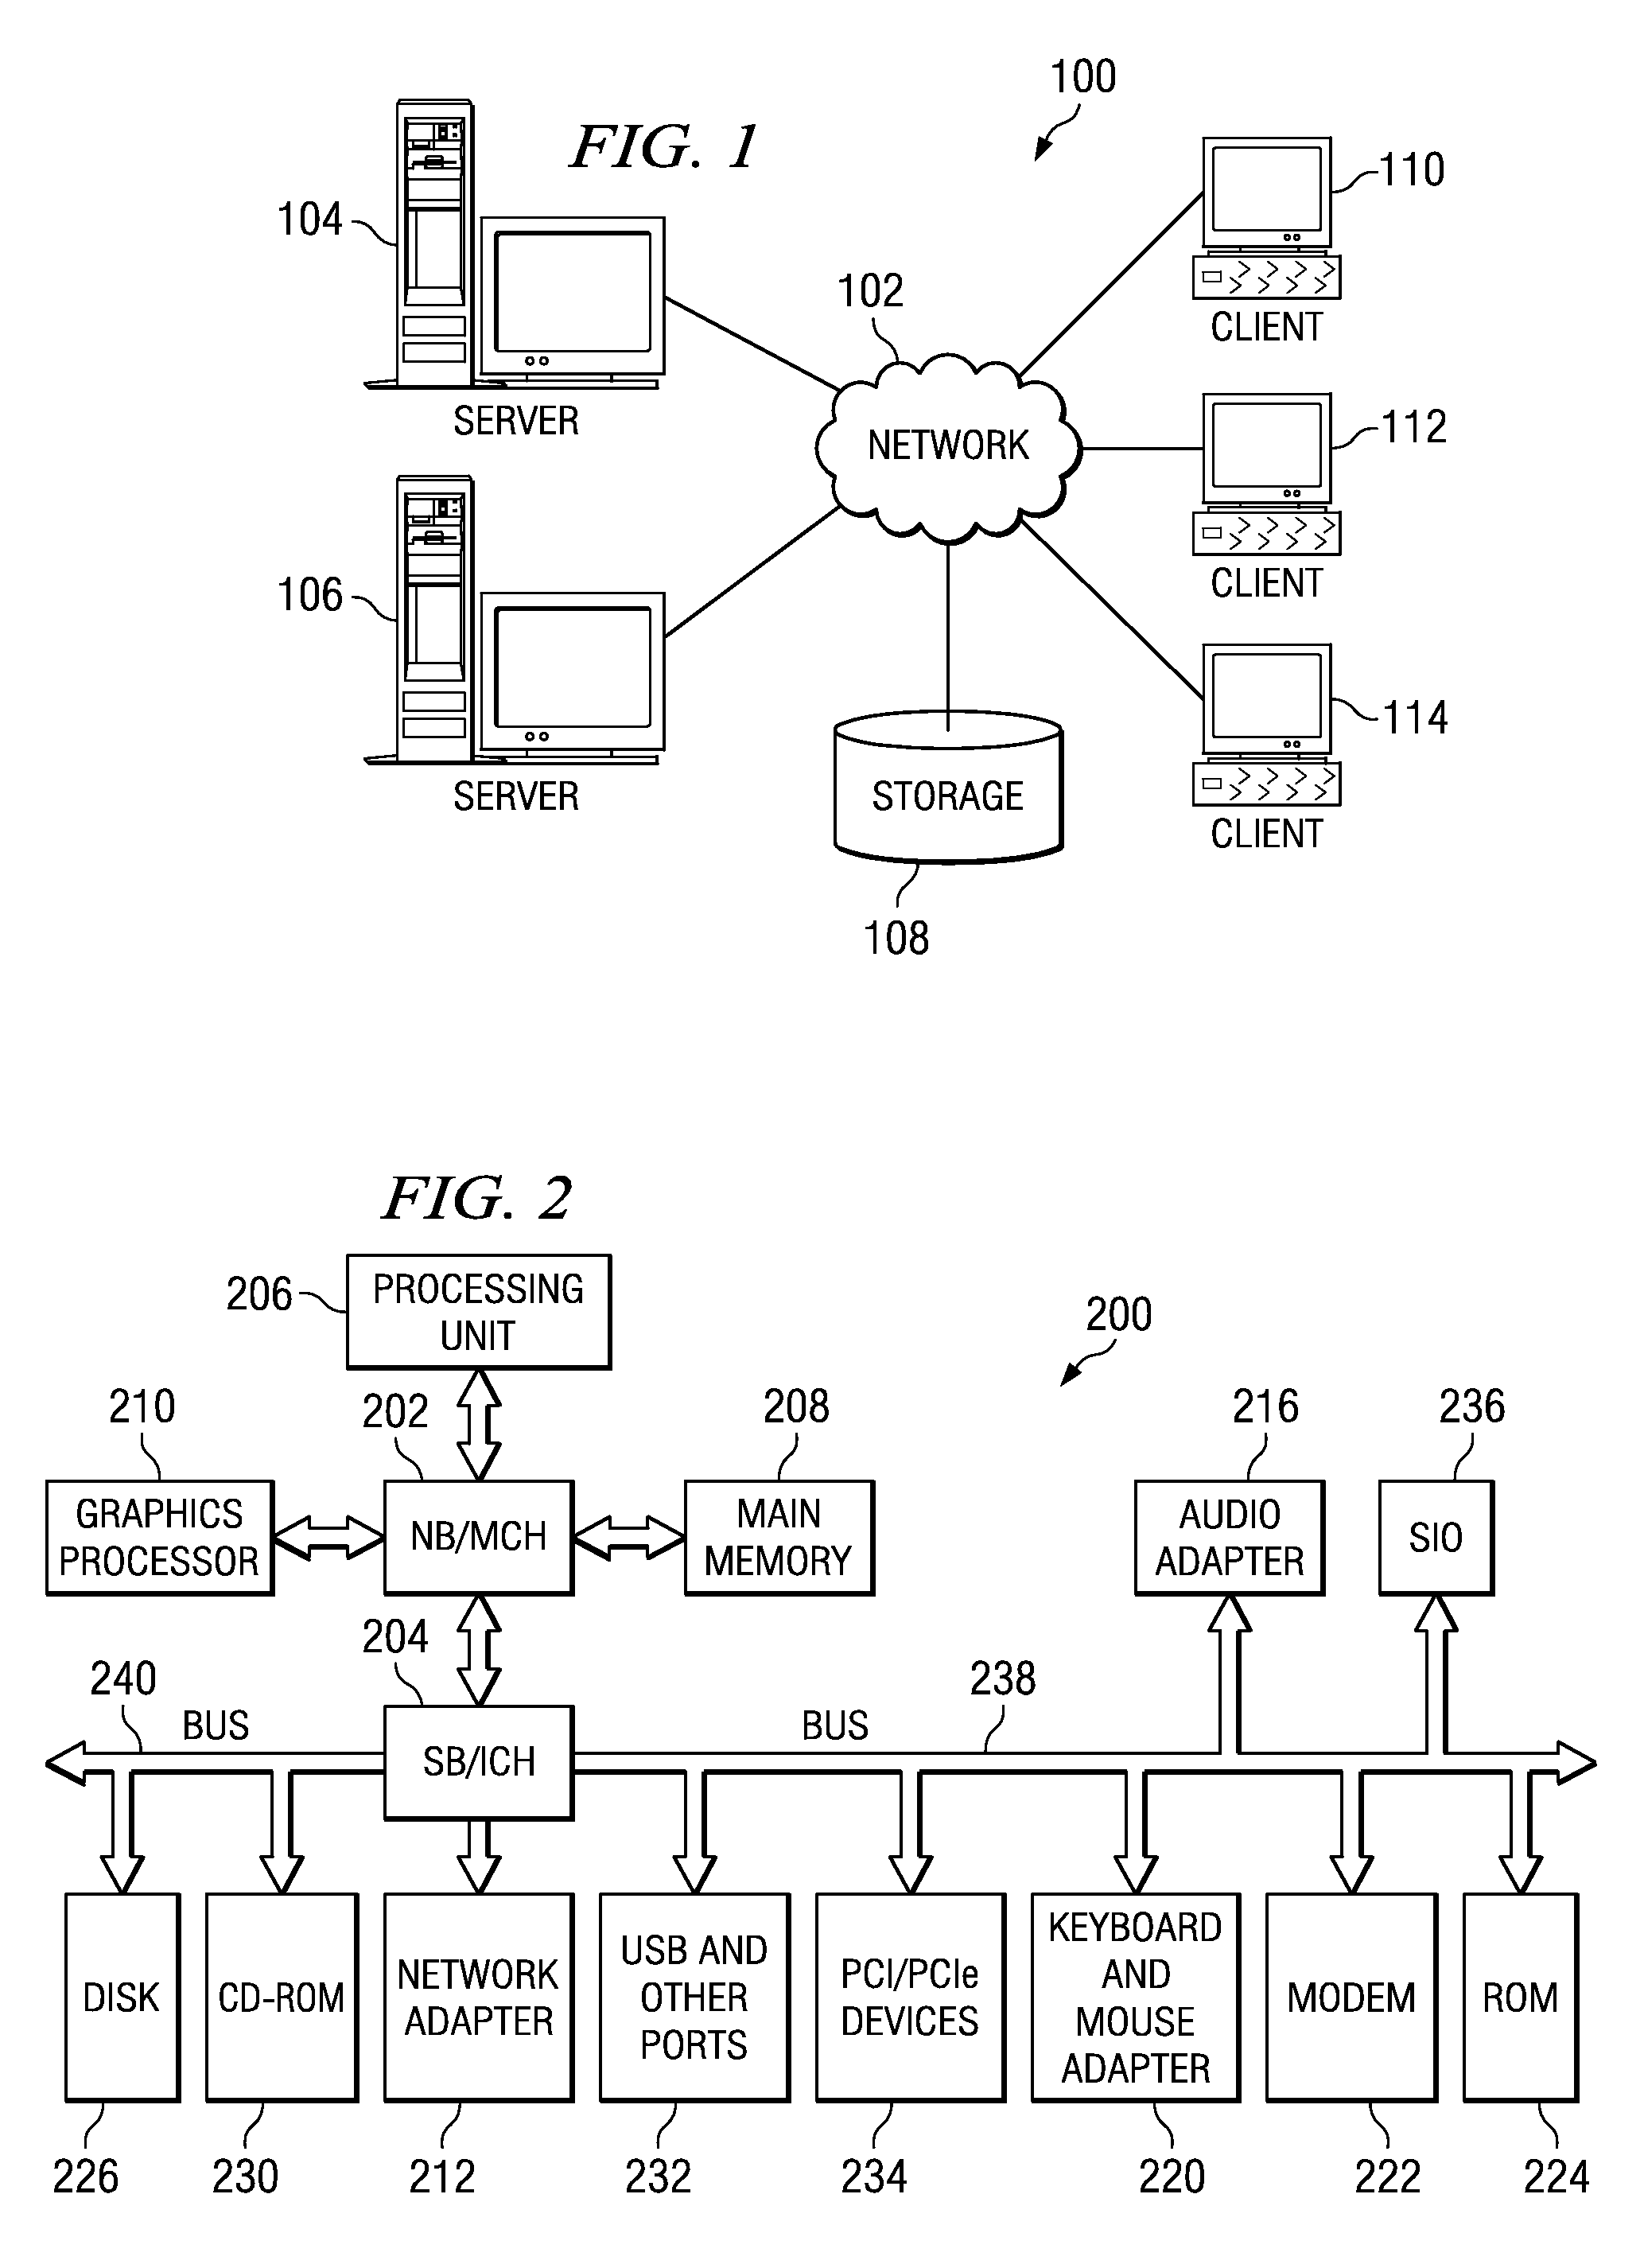 Method and apparatus for improving cluster performance through minimization of method variation